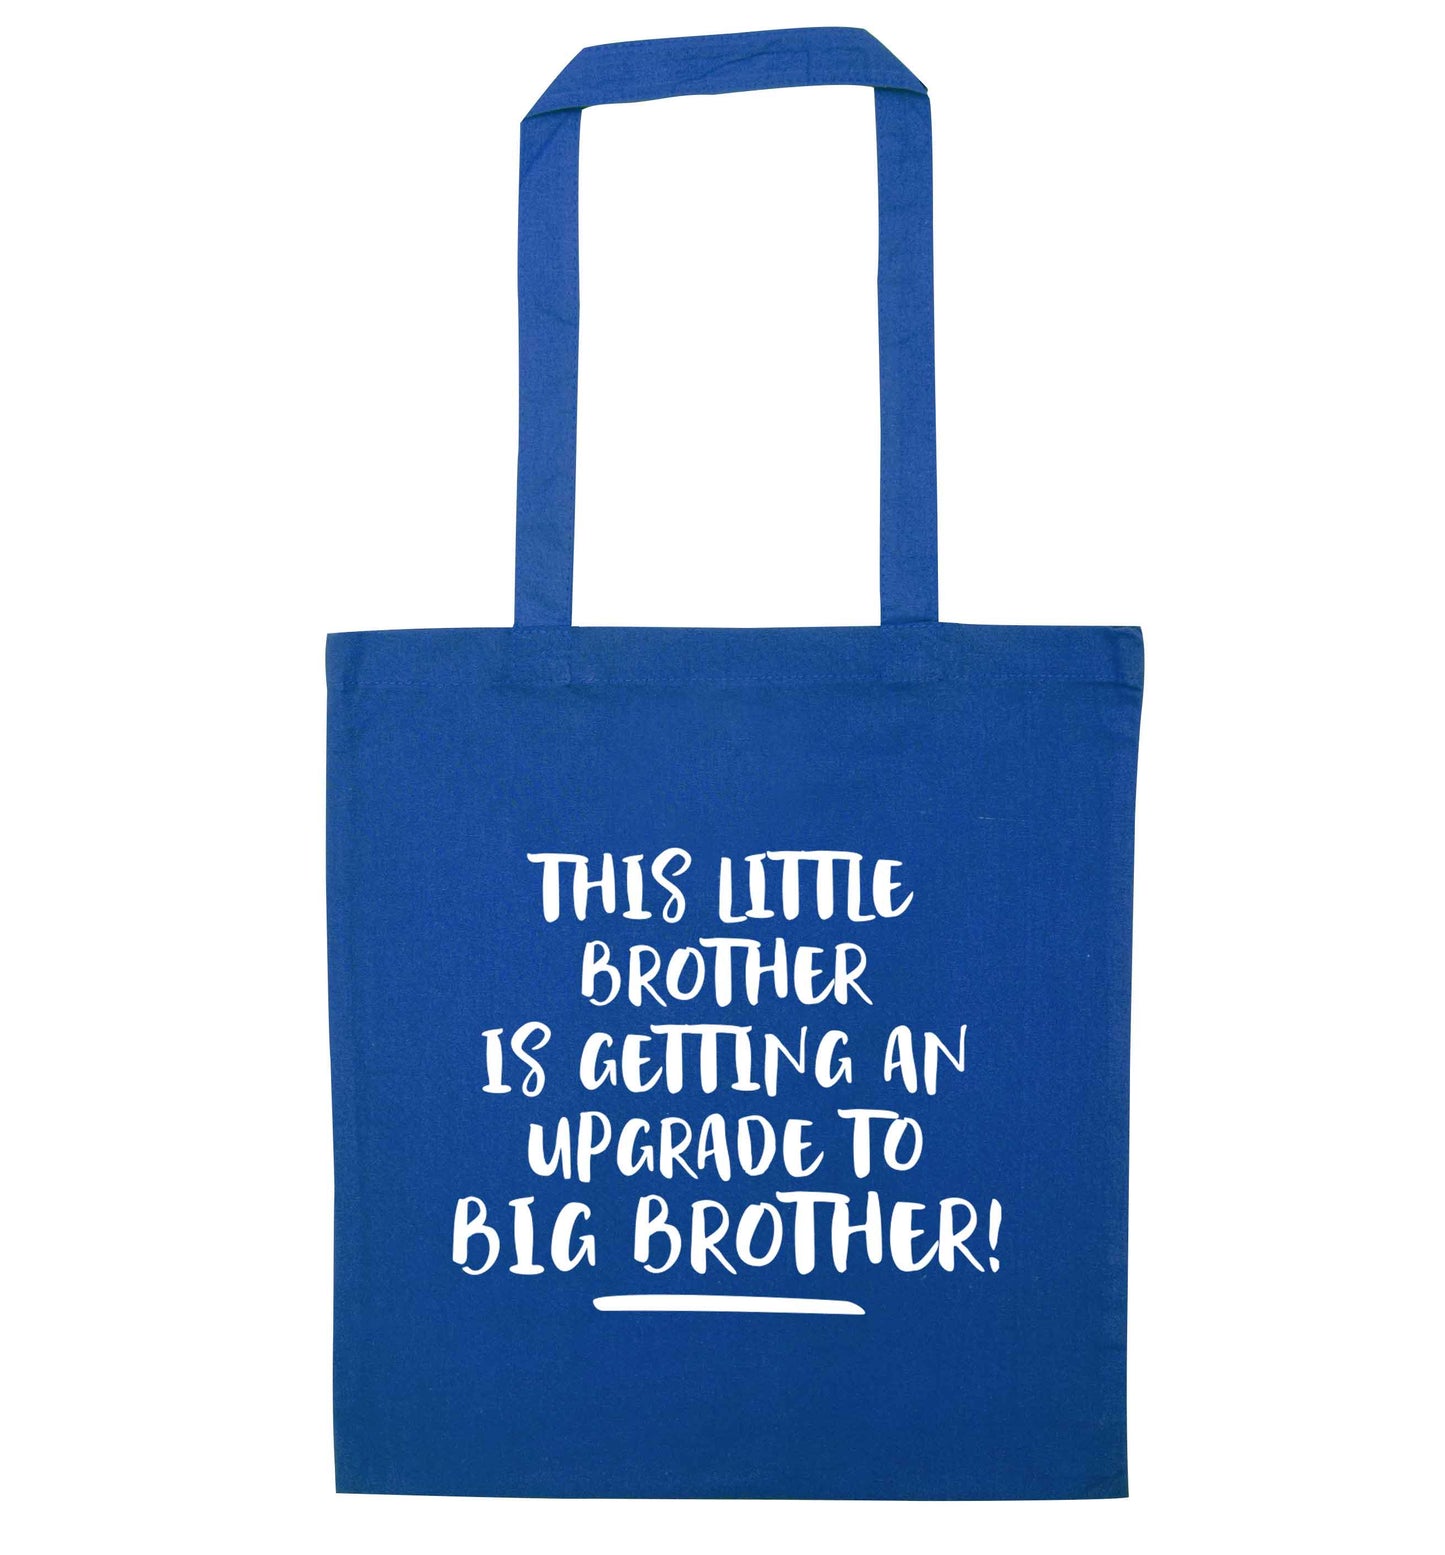 This little brother is getting an upgrade to big brother! blue tote bag